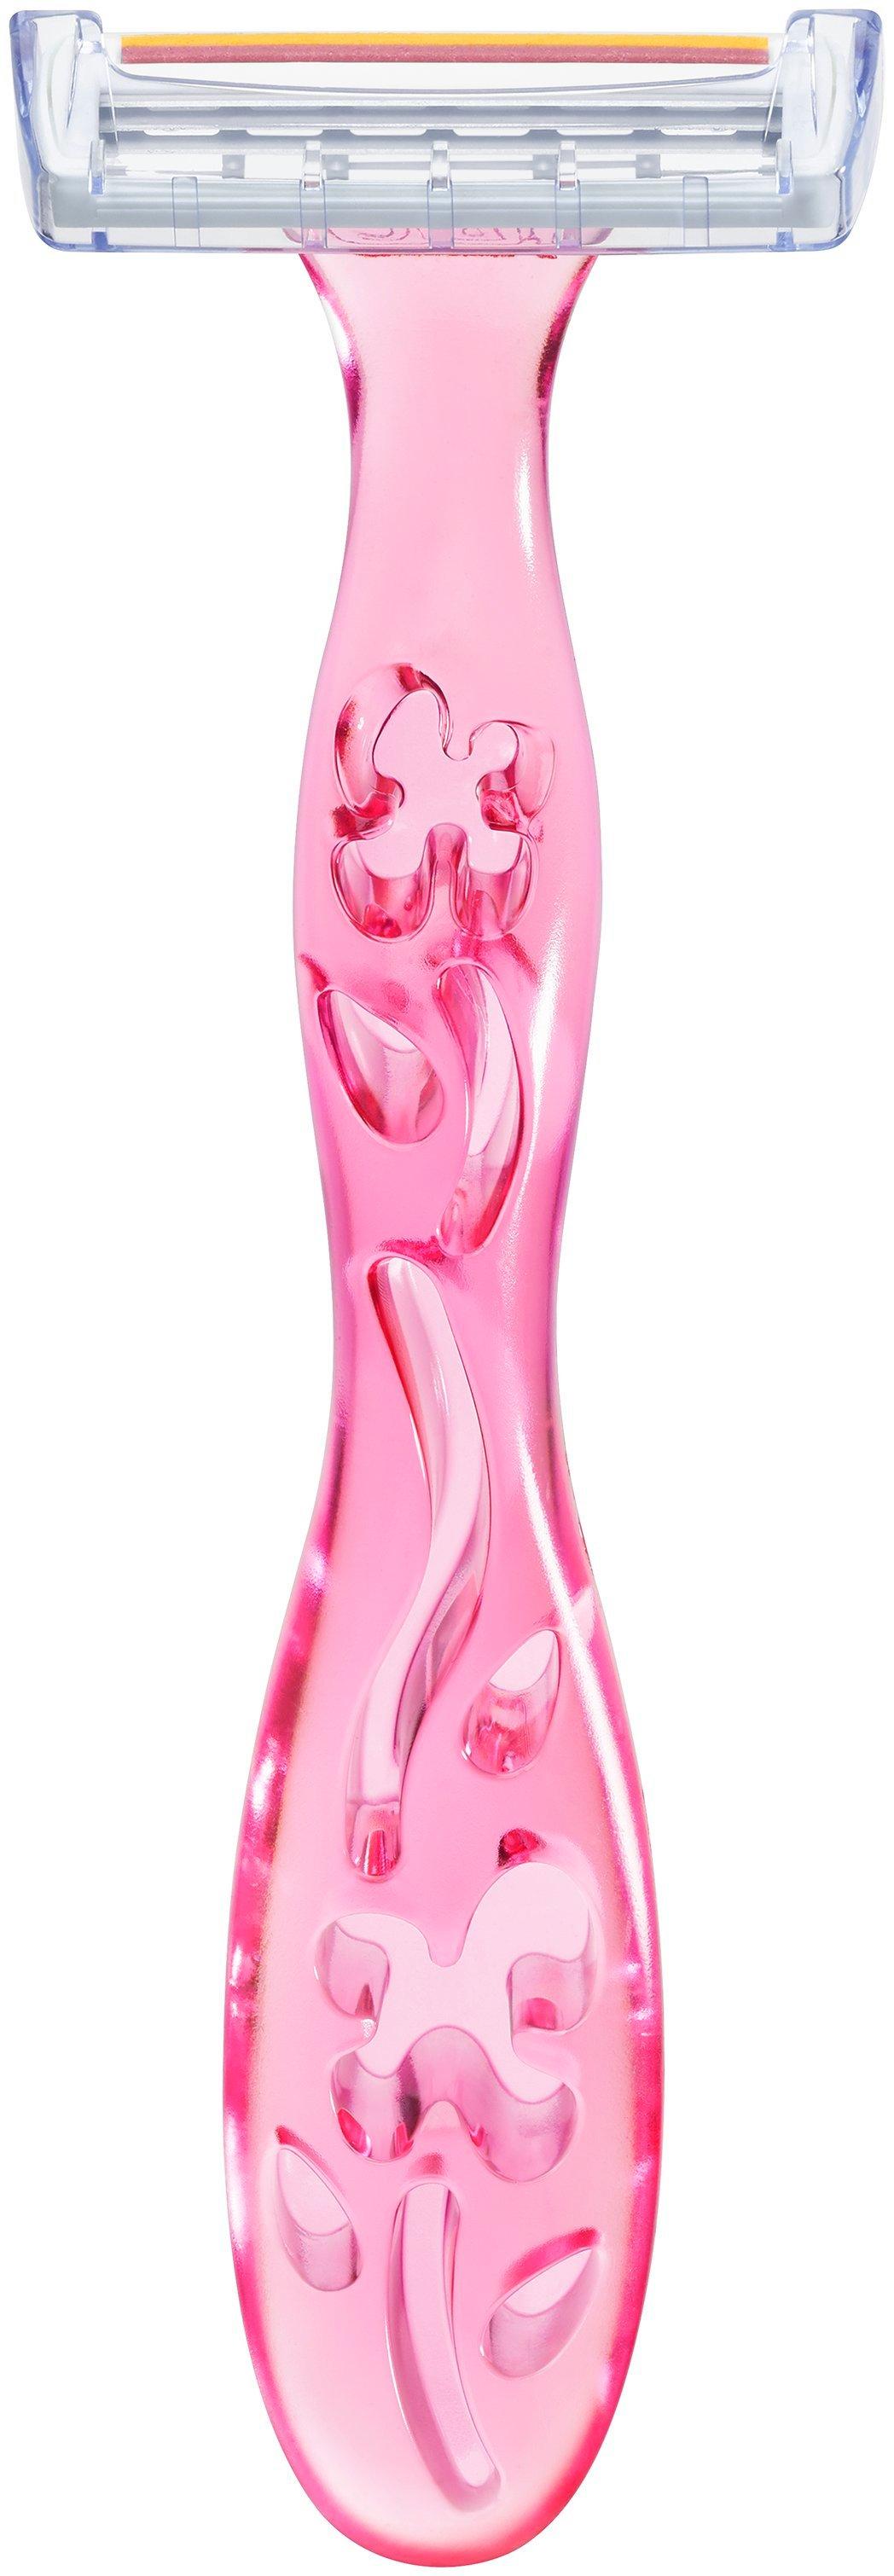 Image of BiC Miss BiC Soleil Pink Blister - 4 pezzi